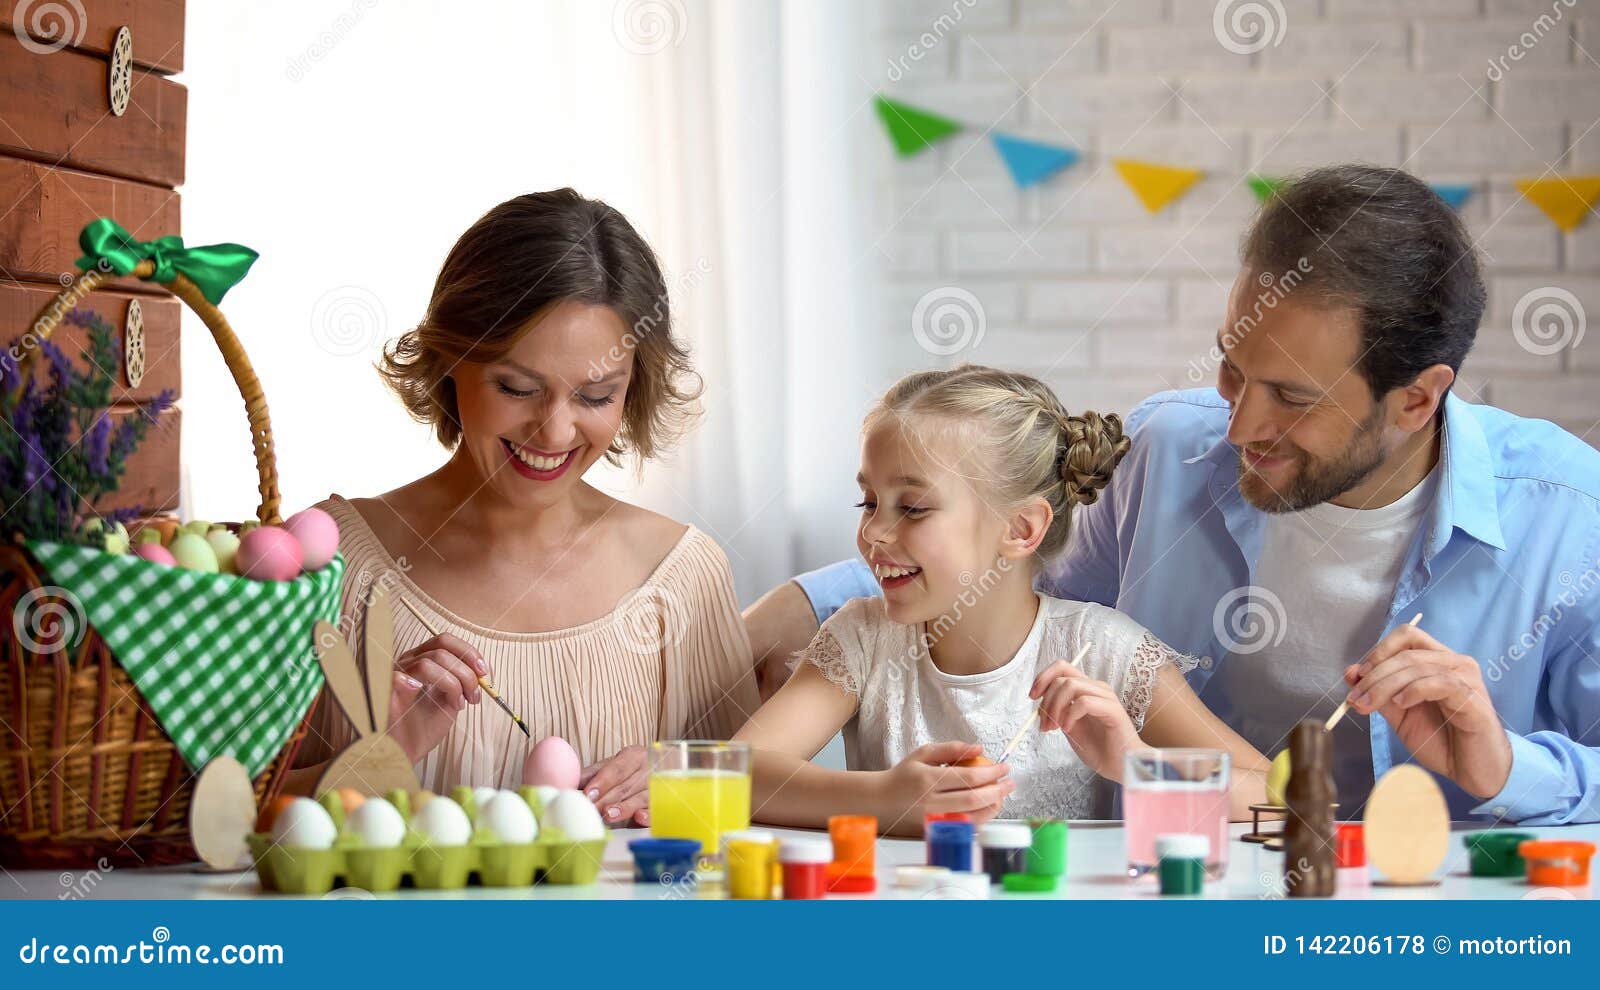 beautiful family decorating easter eggs with colorful paint, ancient traditions